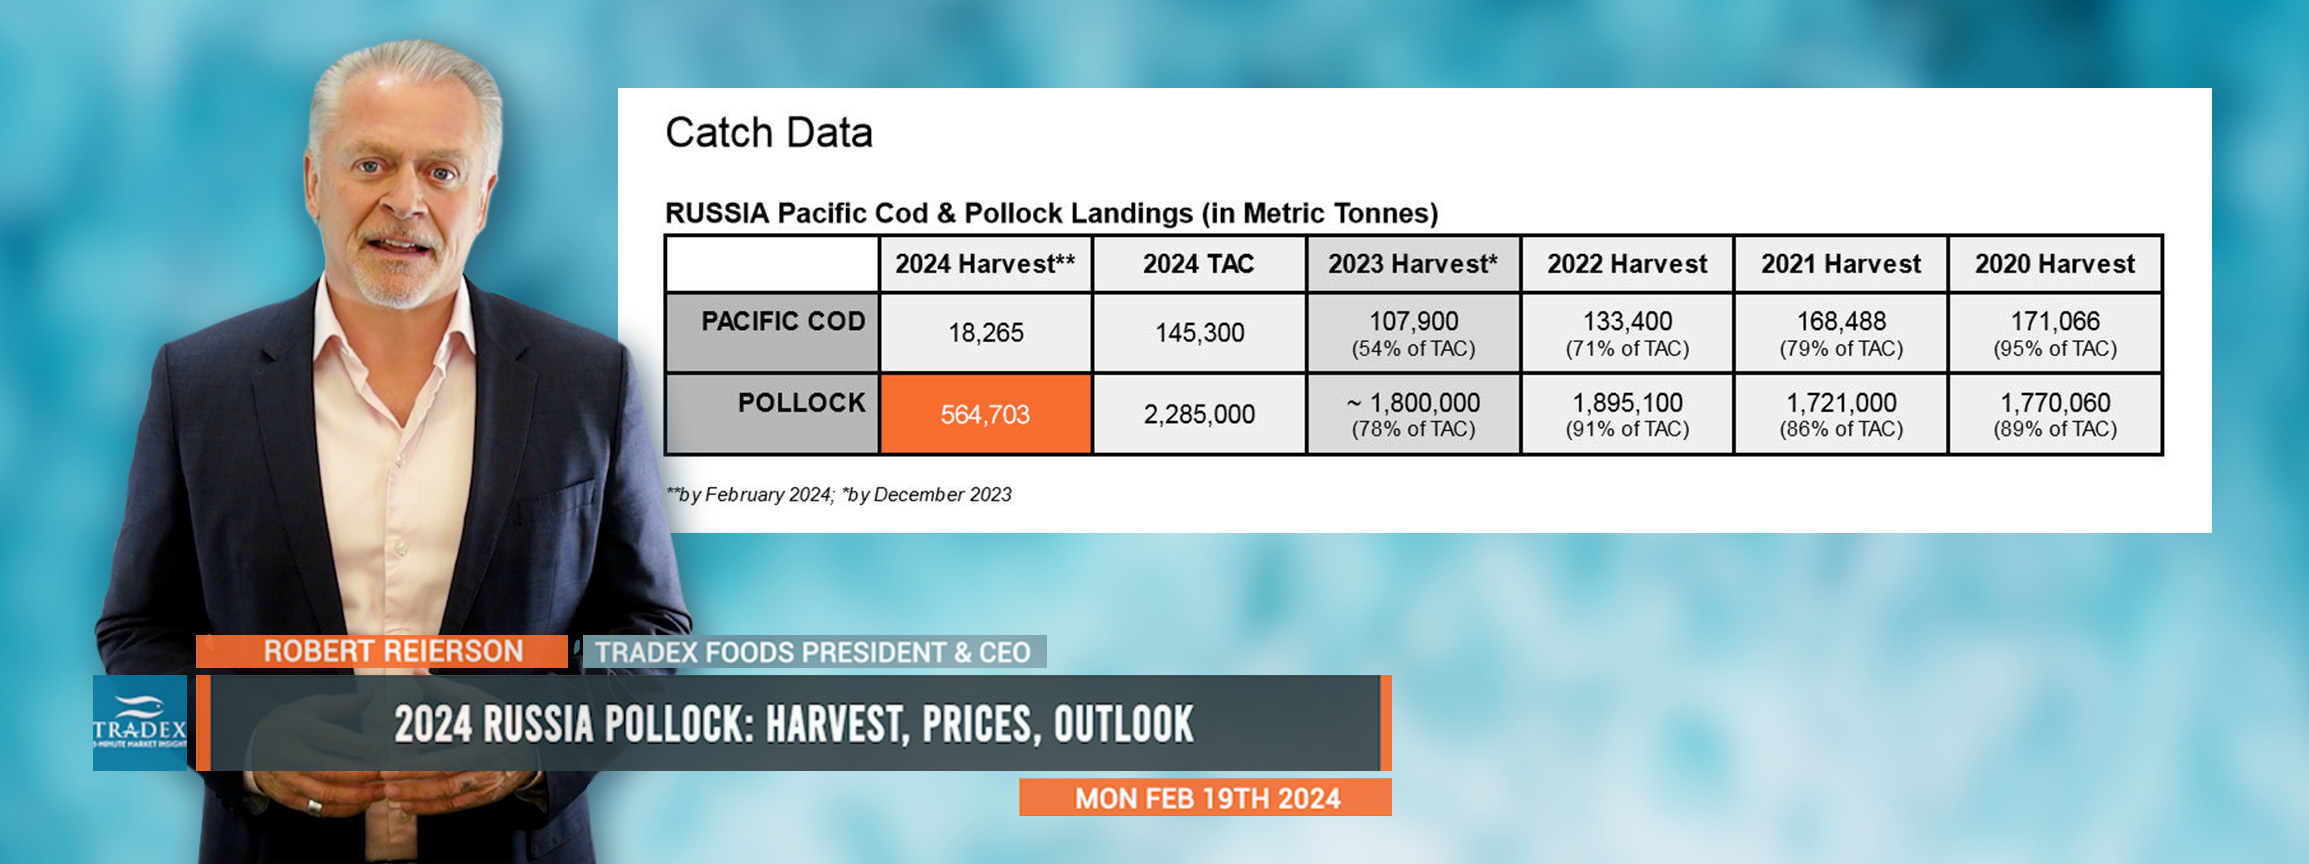 Russian Pollock: Current Harvest Strong, Robust Season Projection, Cheaper Supply & Constraints on Horizon - 3-Minute Market Insight
